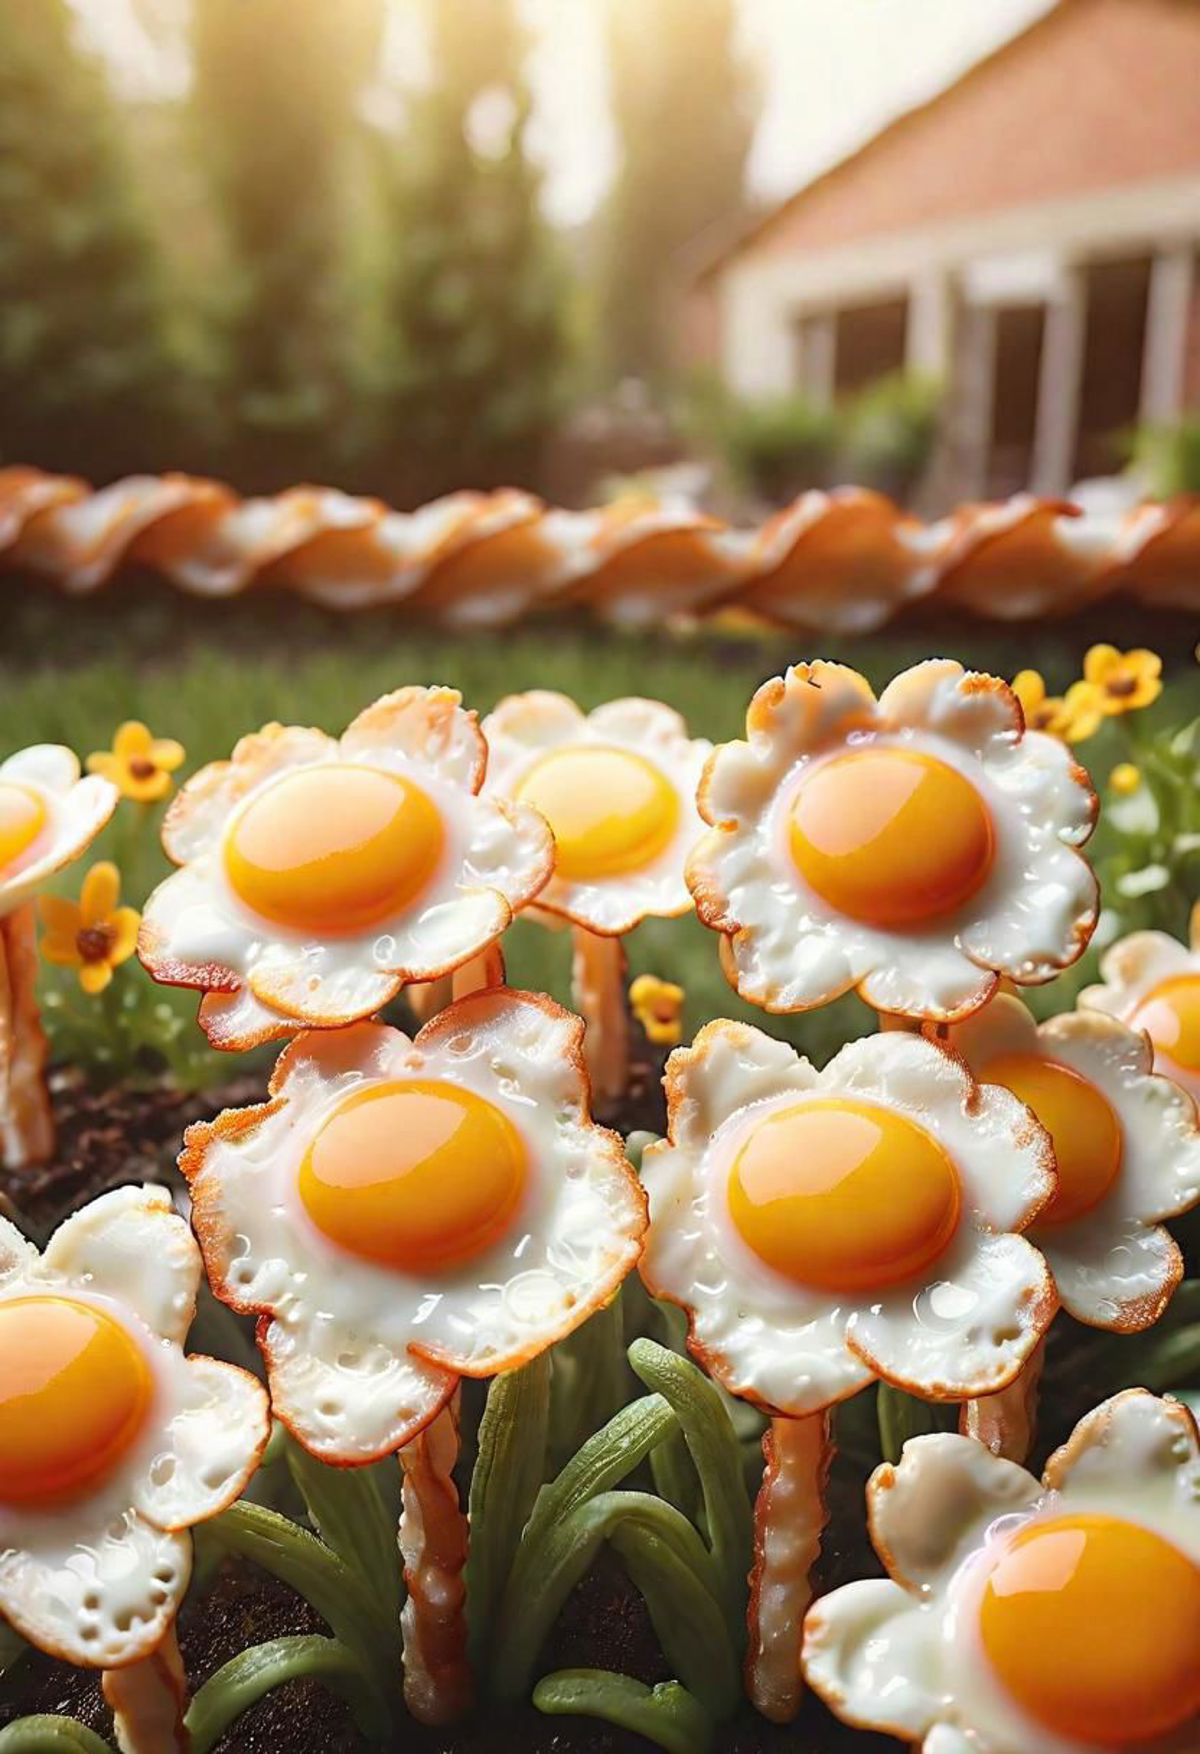 A garden of fake sunny side up eggs on sticks.